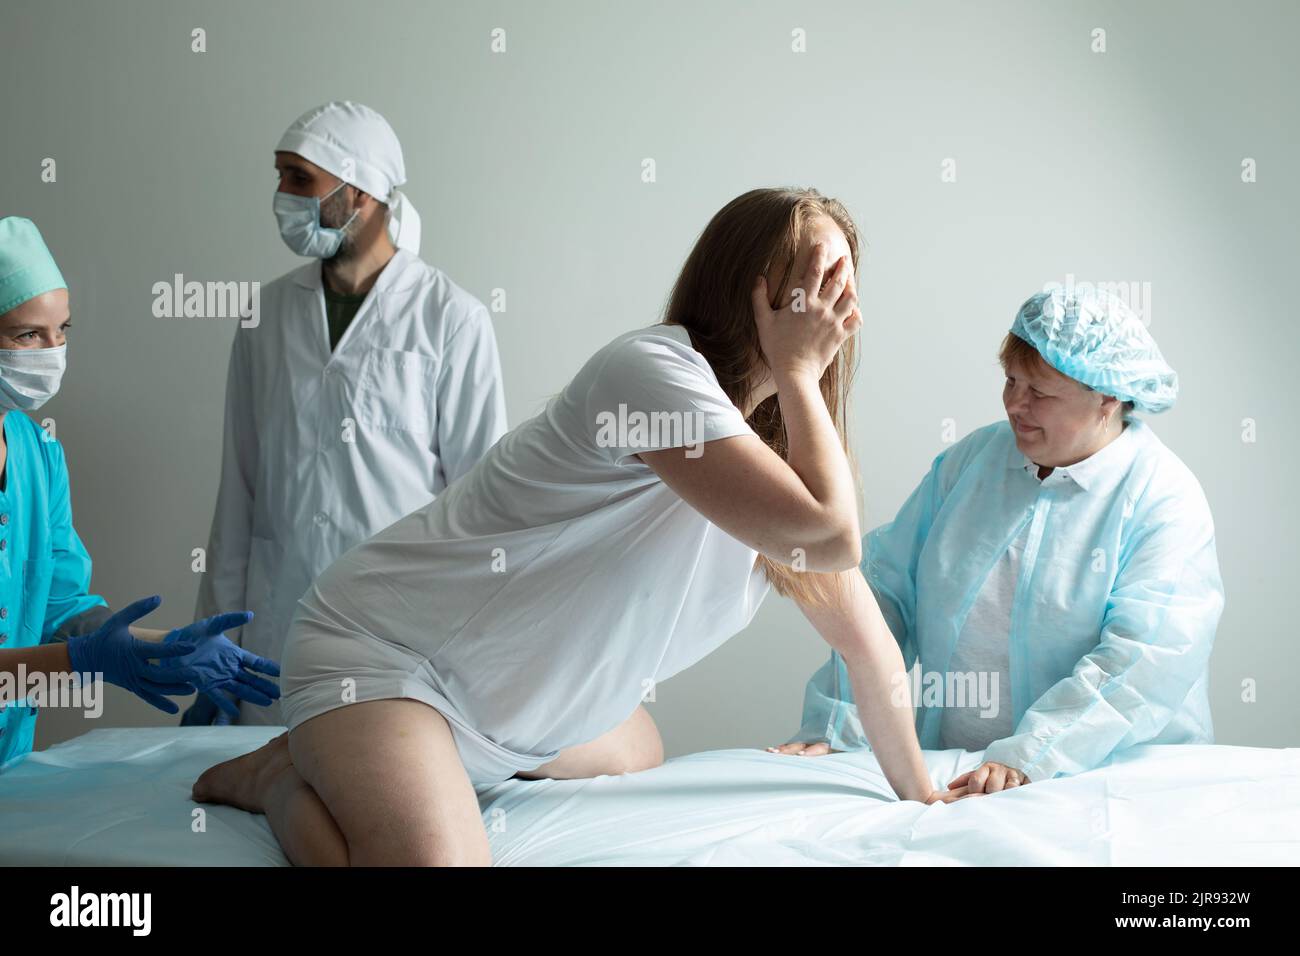 Child birth process, helping personal during natural labour Stock Photo